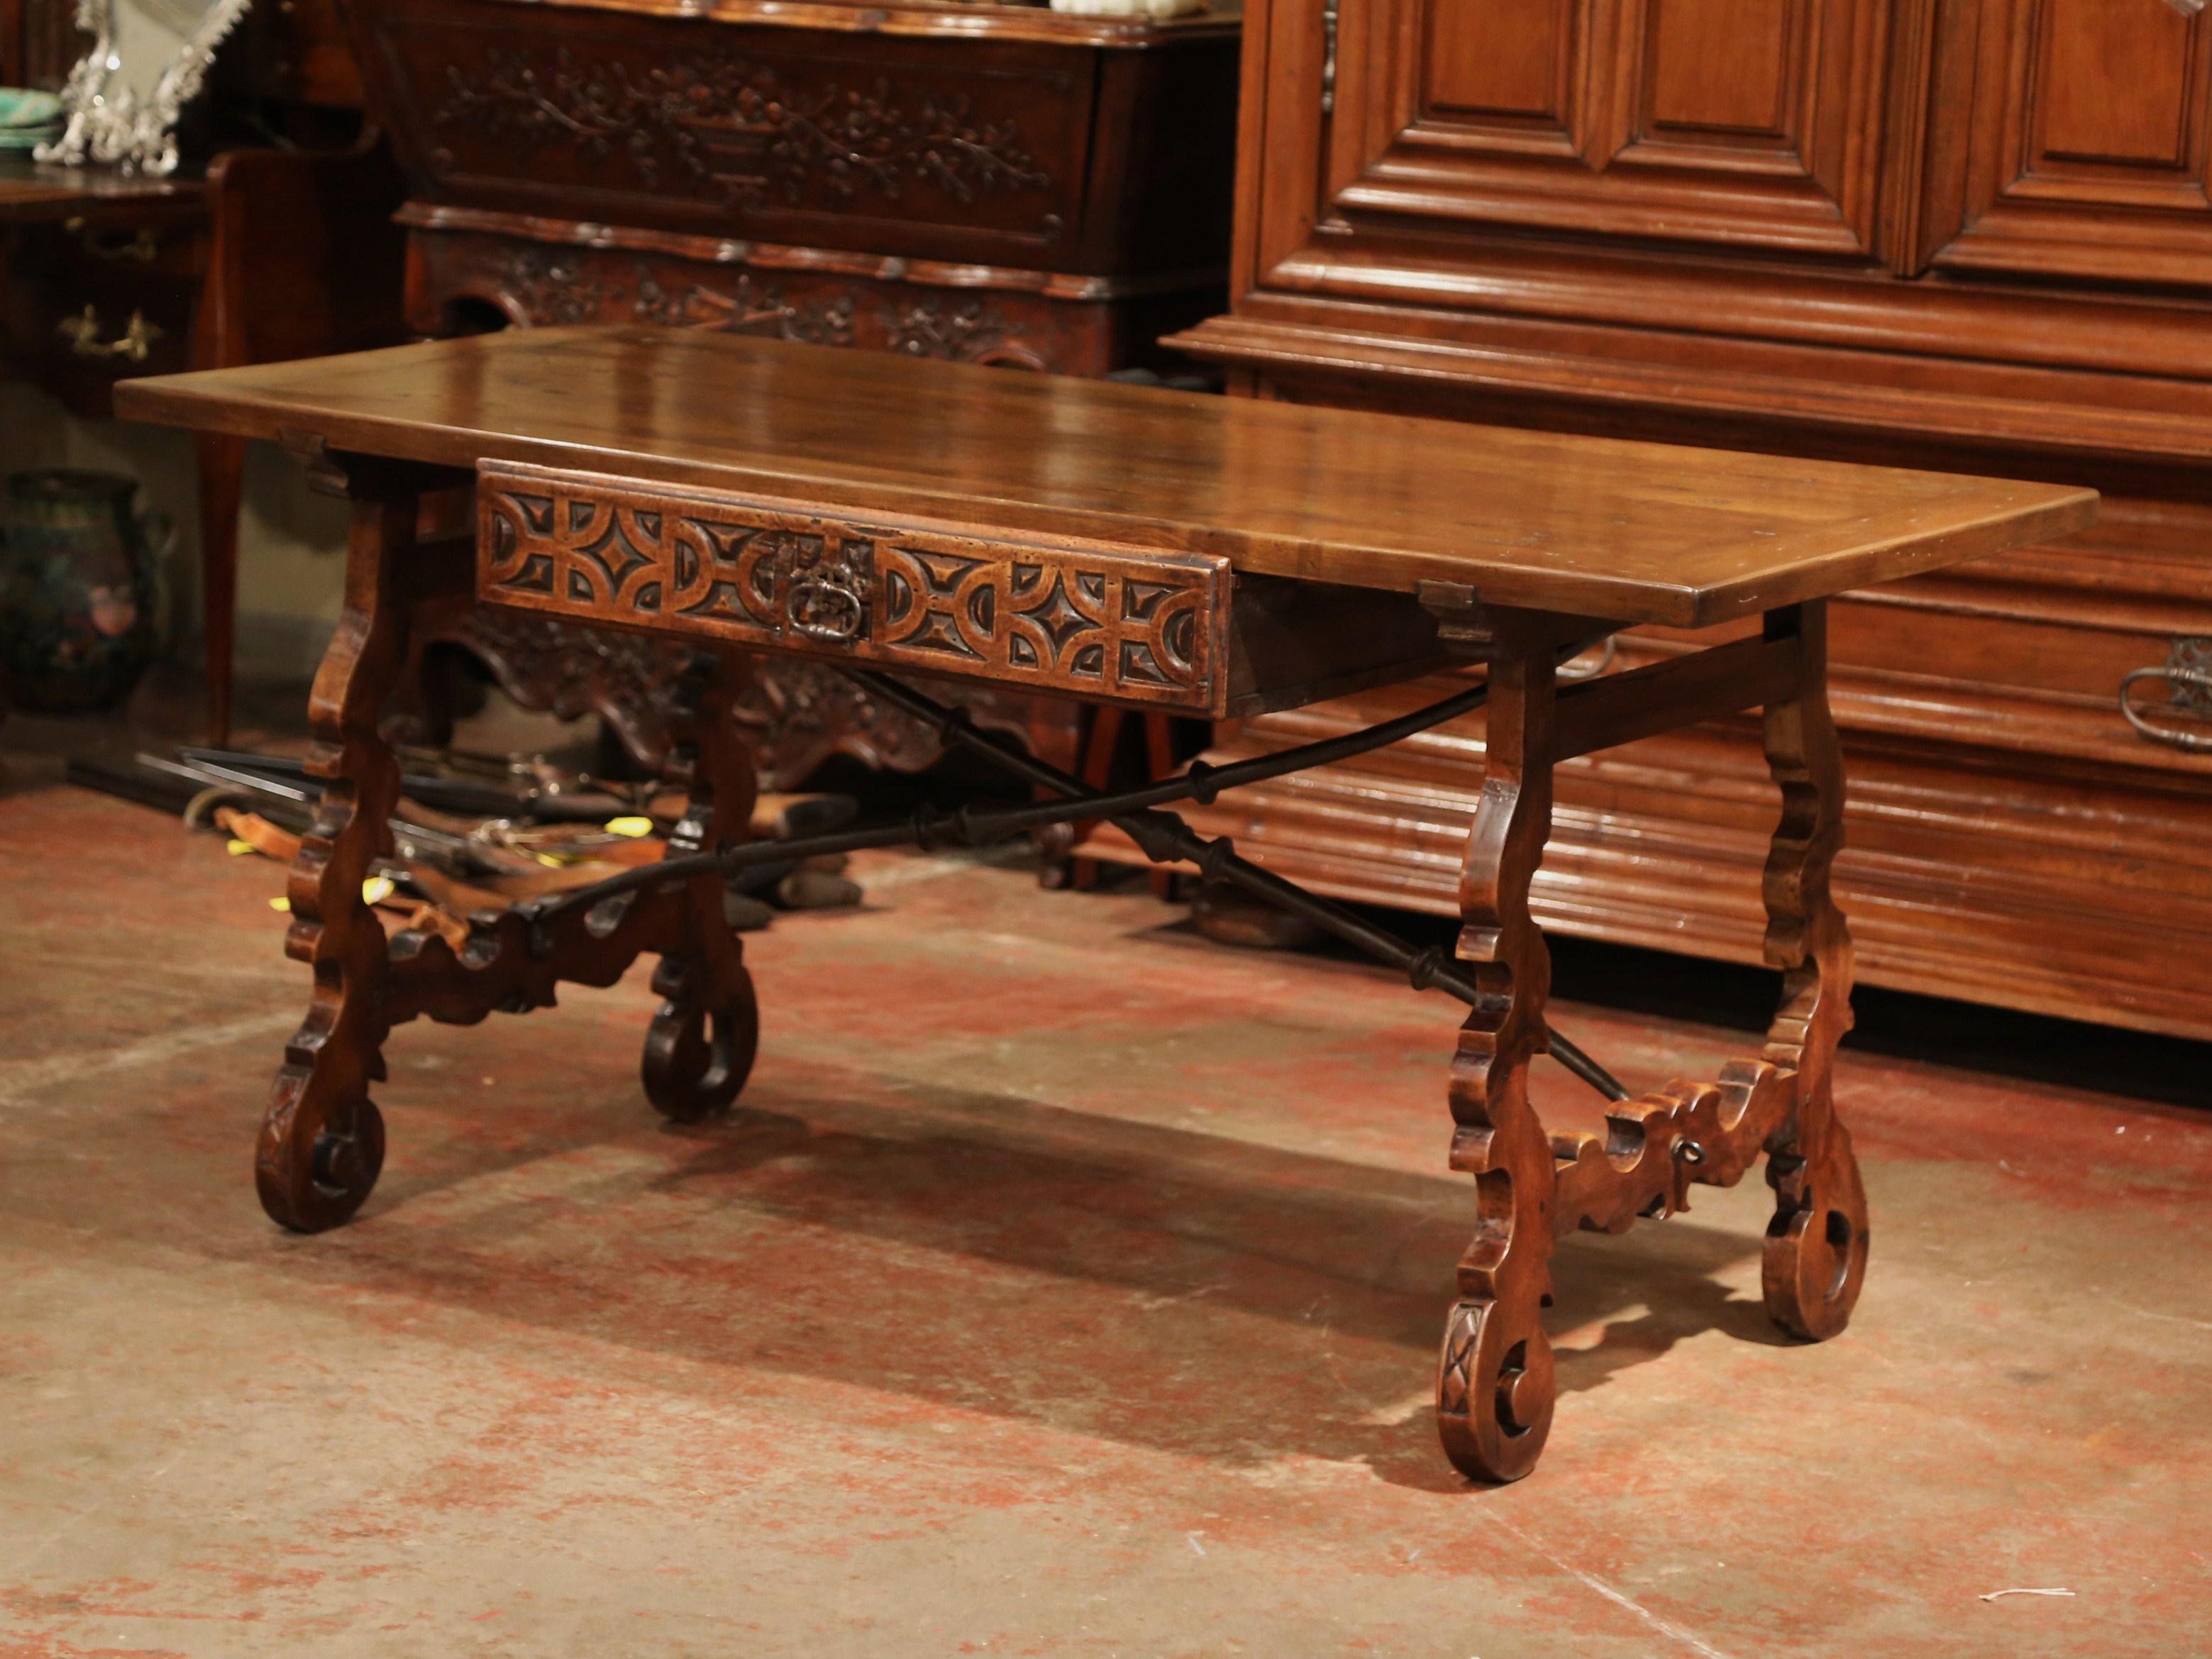 Wrought Iron Mid-19th Century Spanish Carved Walnut Writing Table Desk with Centre Drawer